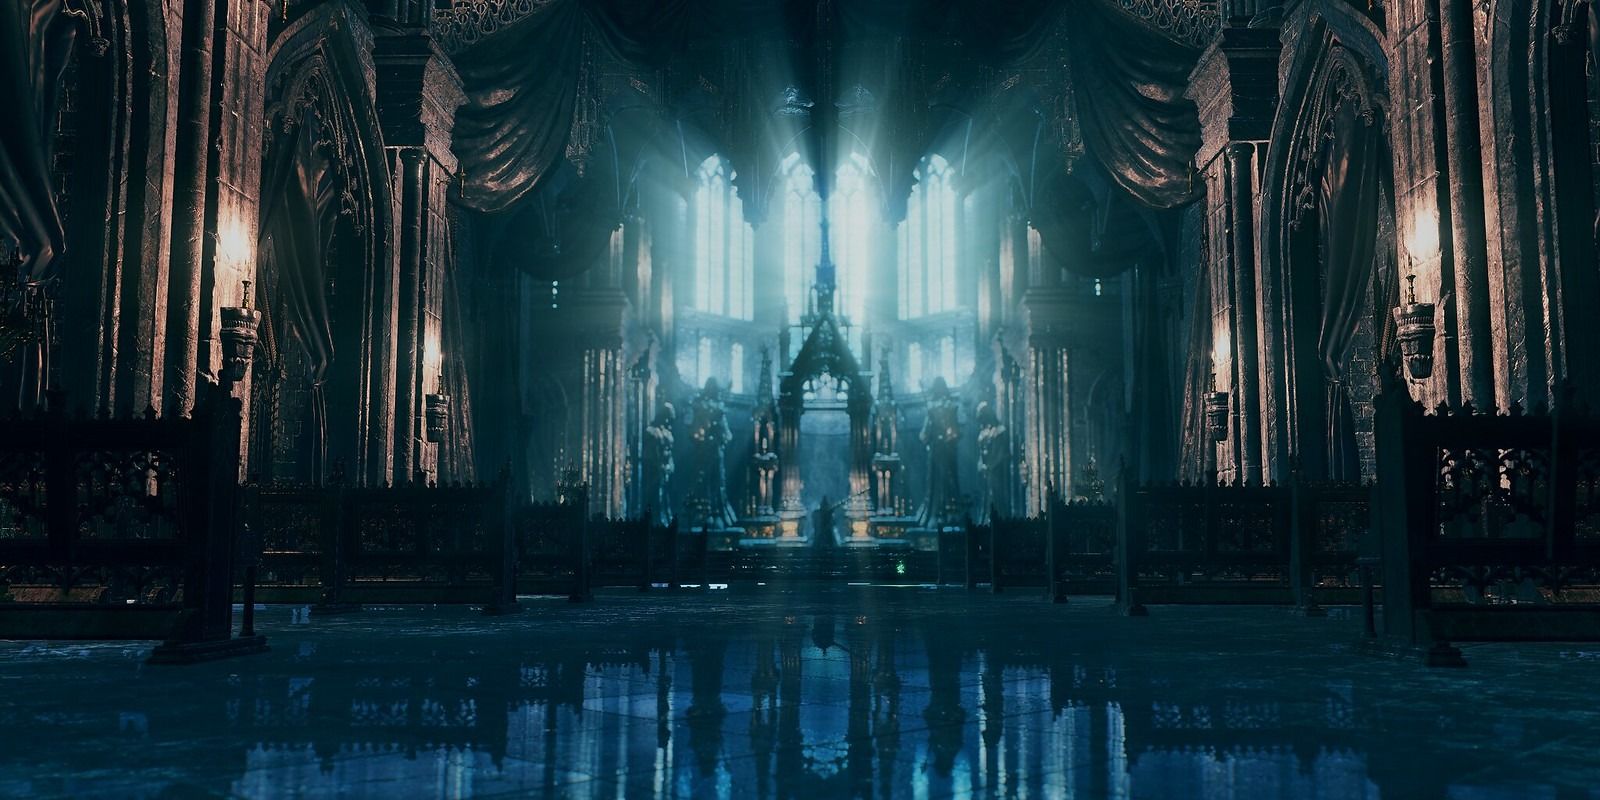 Vast room of a cathedral lit in blue light with pews and intricate details